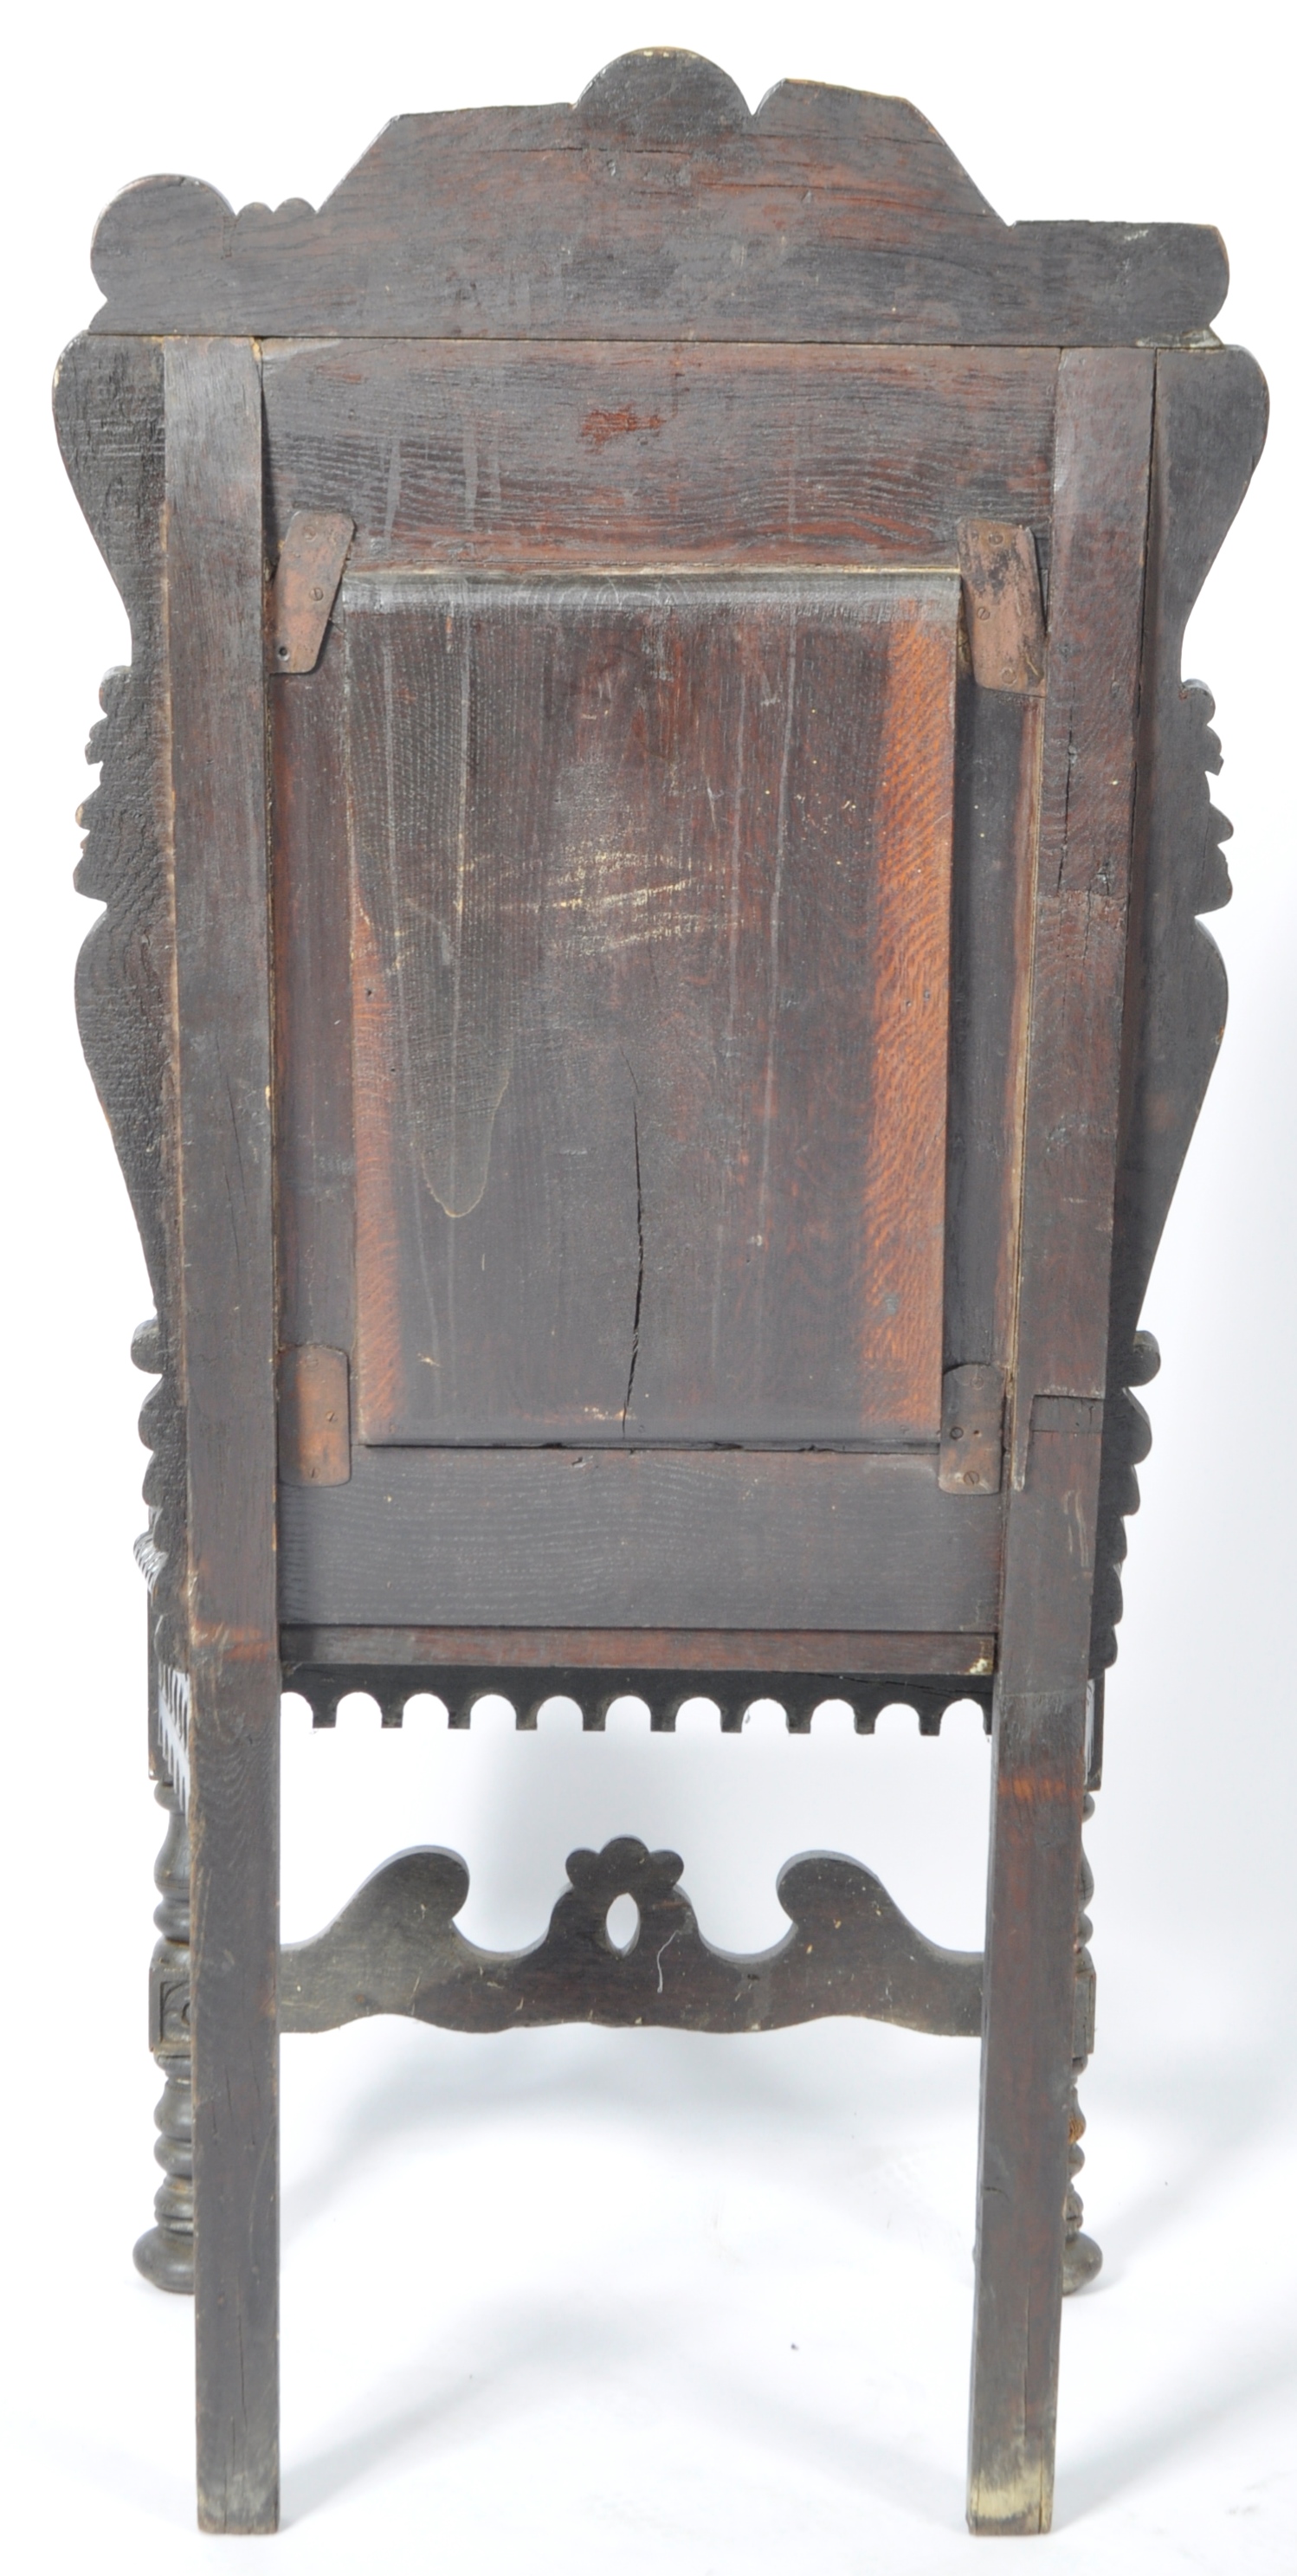 ANTIQUE 19H CENTURY VICTORIAN CARVED OAK WAINSCOT CHAIR - Image 8 of 9